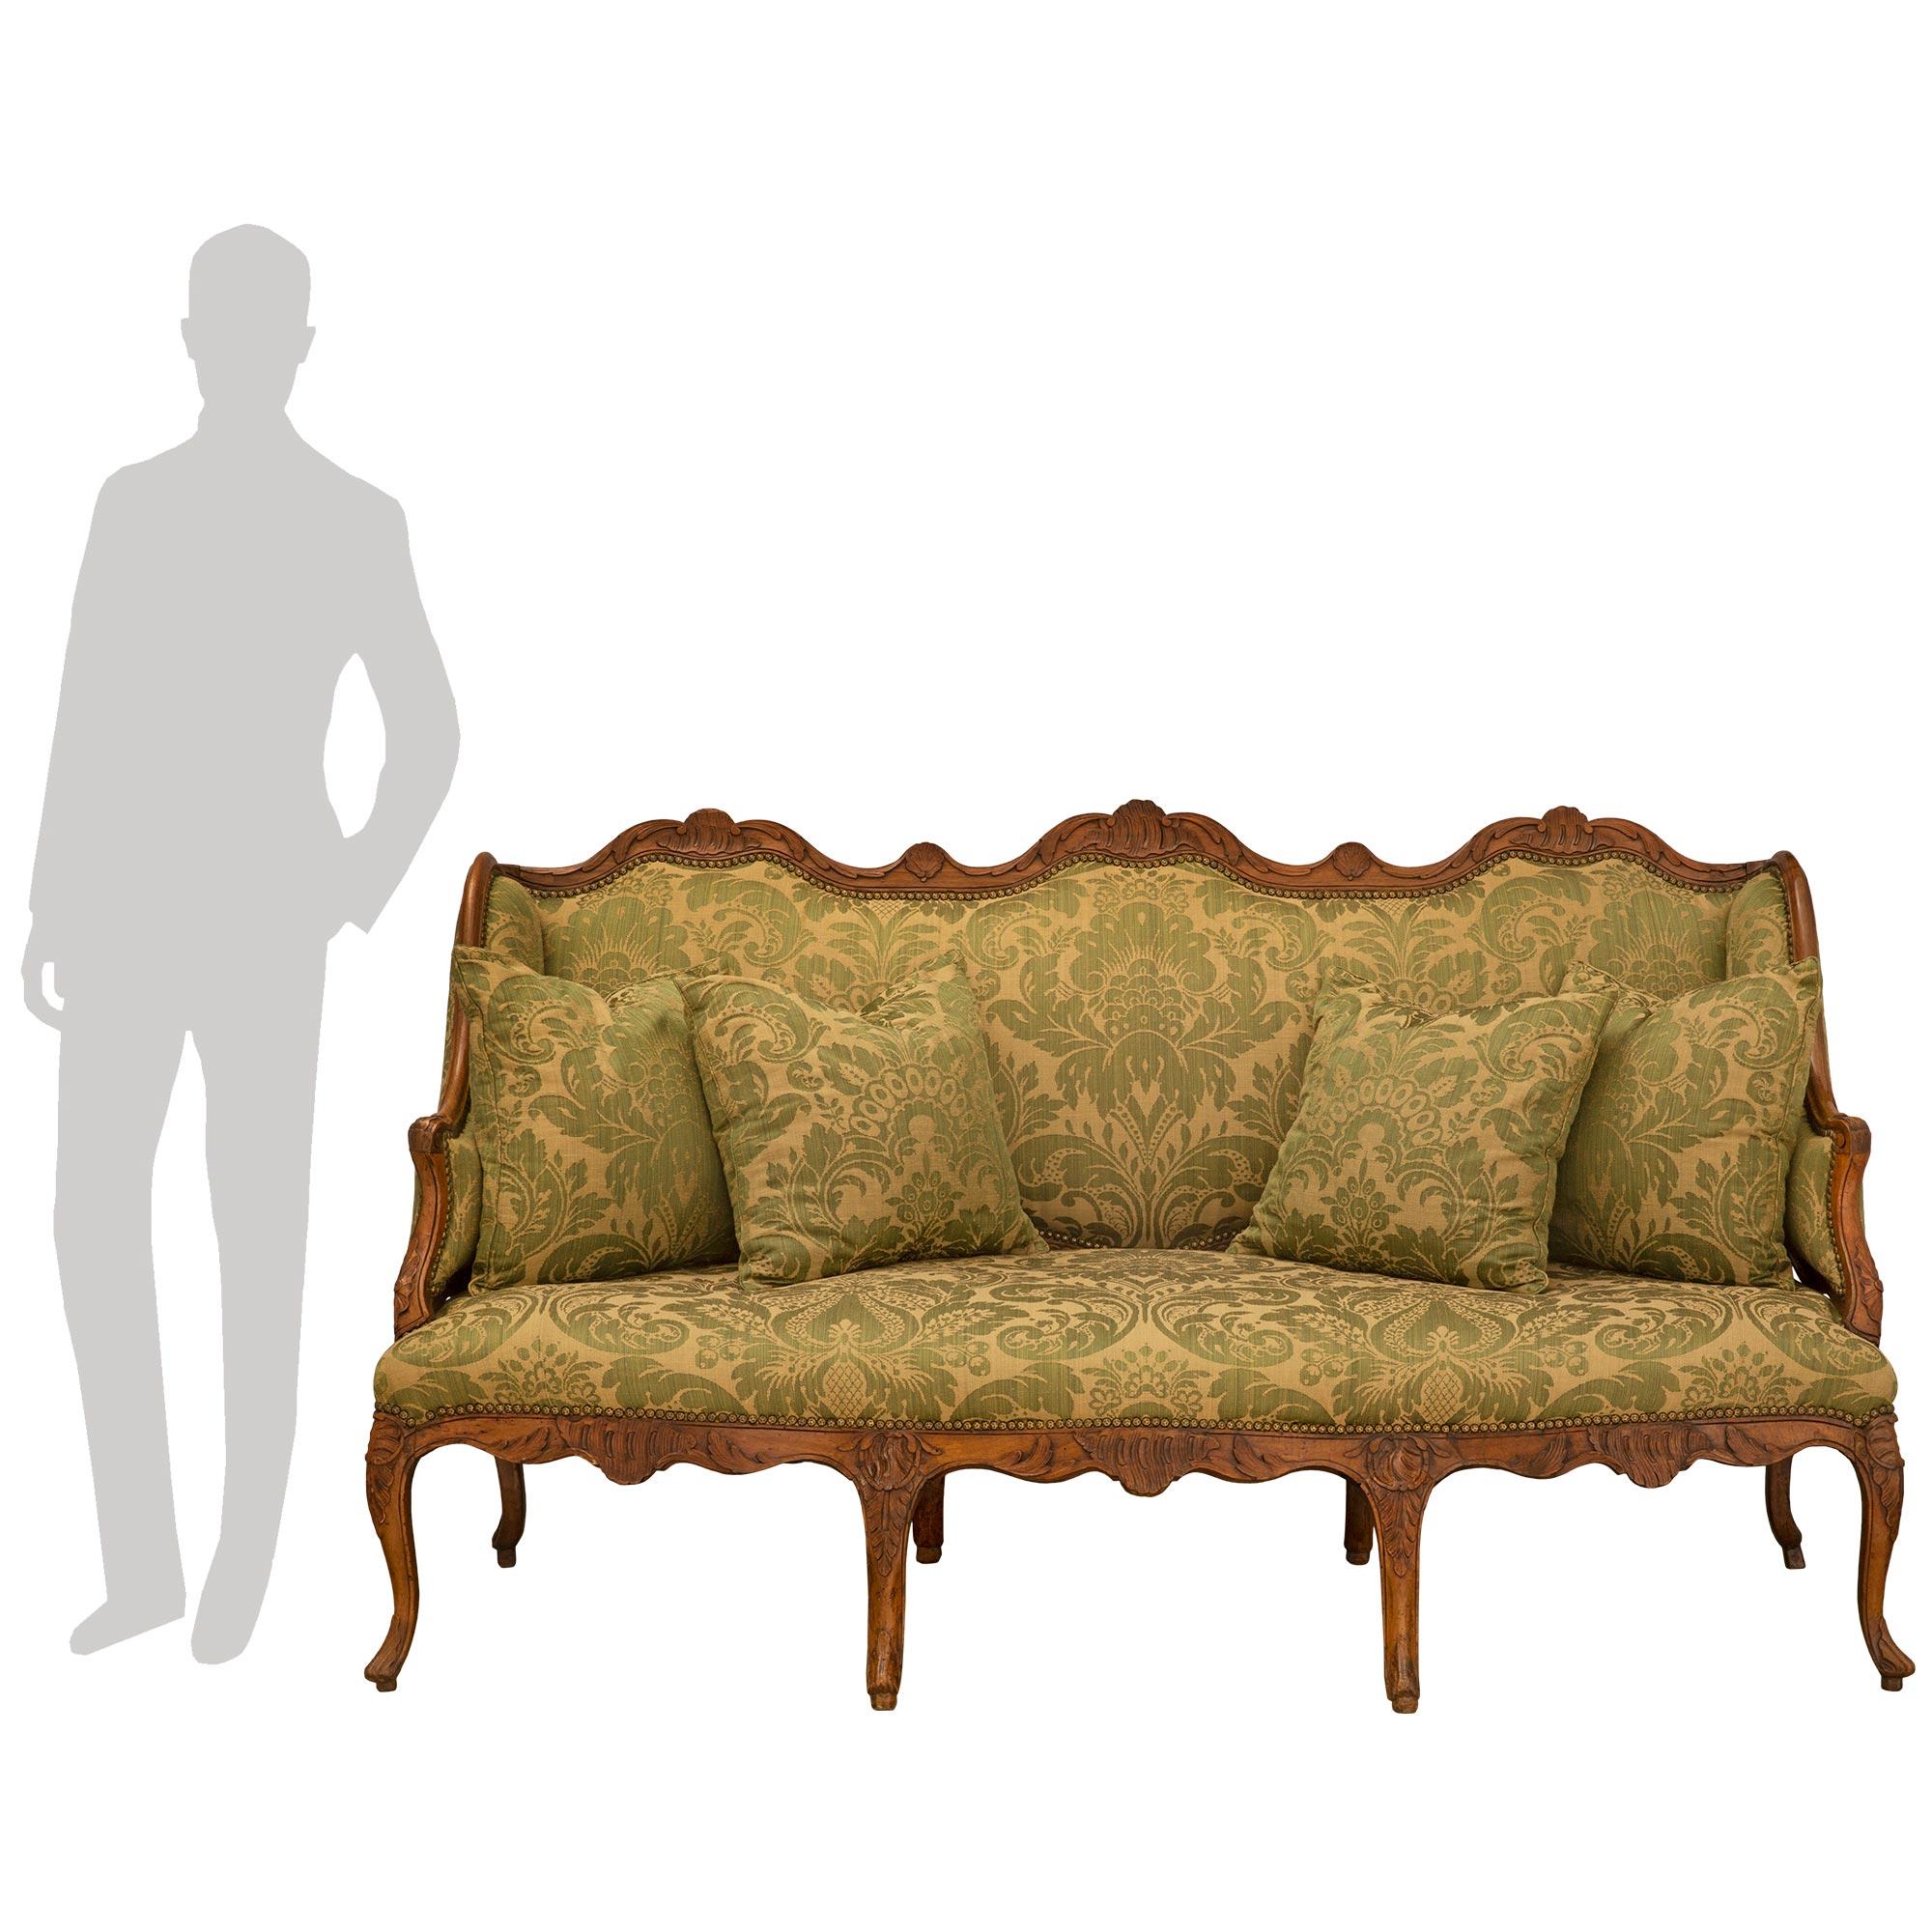 A sensational French early 19th century Louis XV st. walnut canapé. Raised by eight impressive scrolled cabriolet legs with floral carvings. Each centered with a carved acanthus leaf pattern. Above is the exaggerated serpentine shaped back with